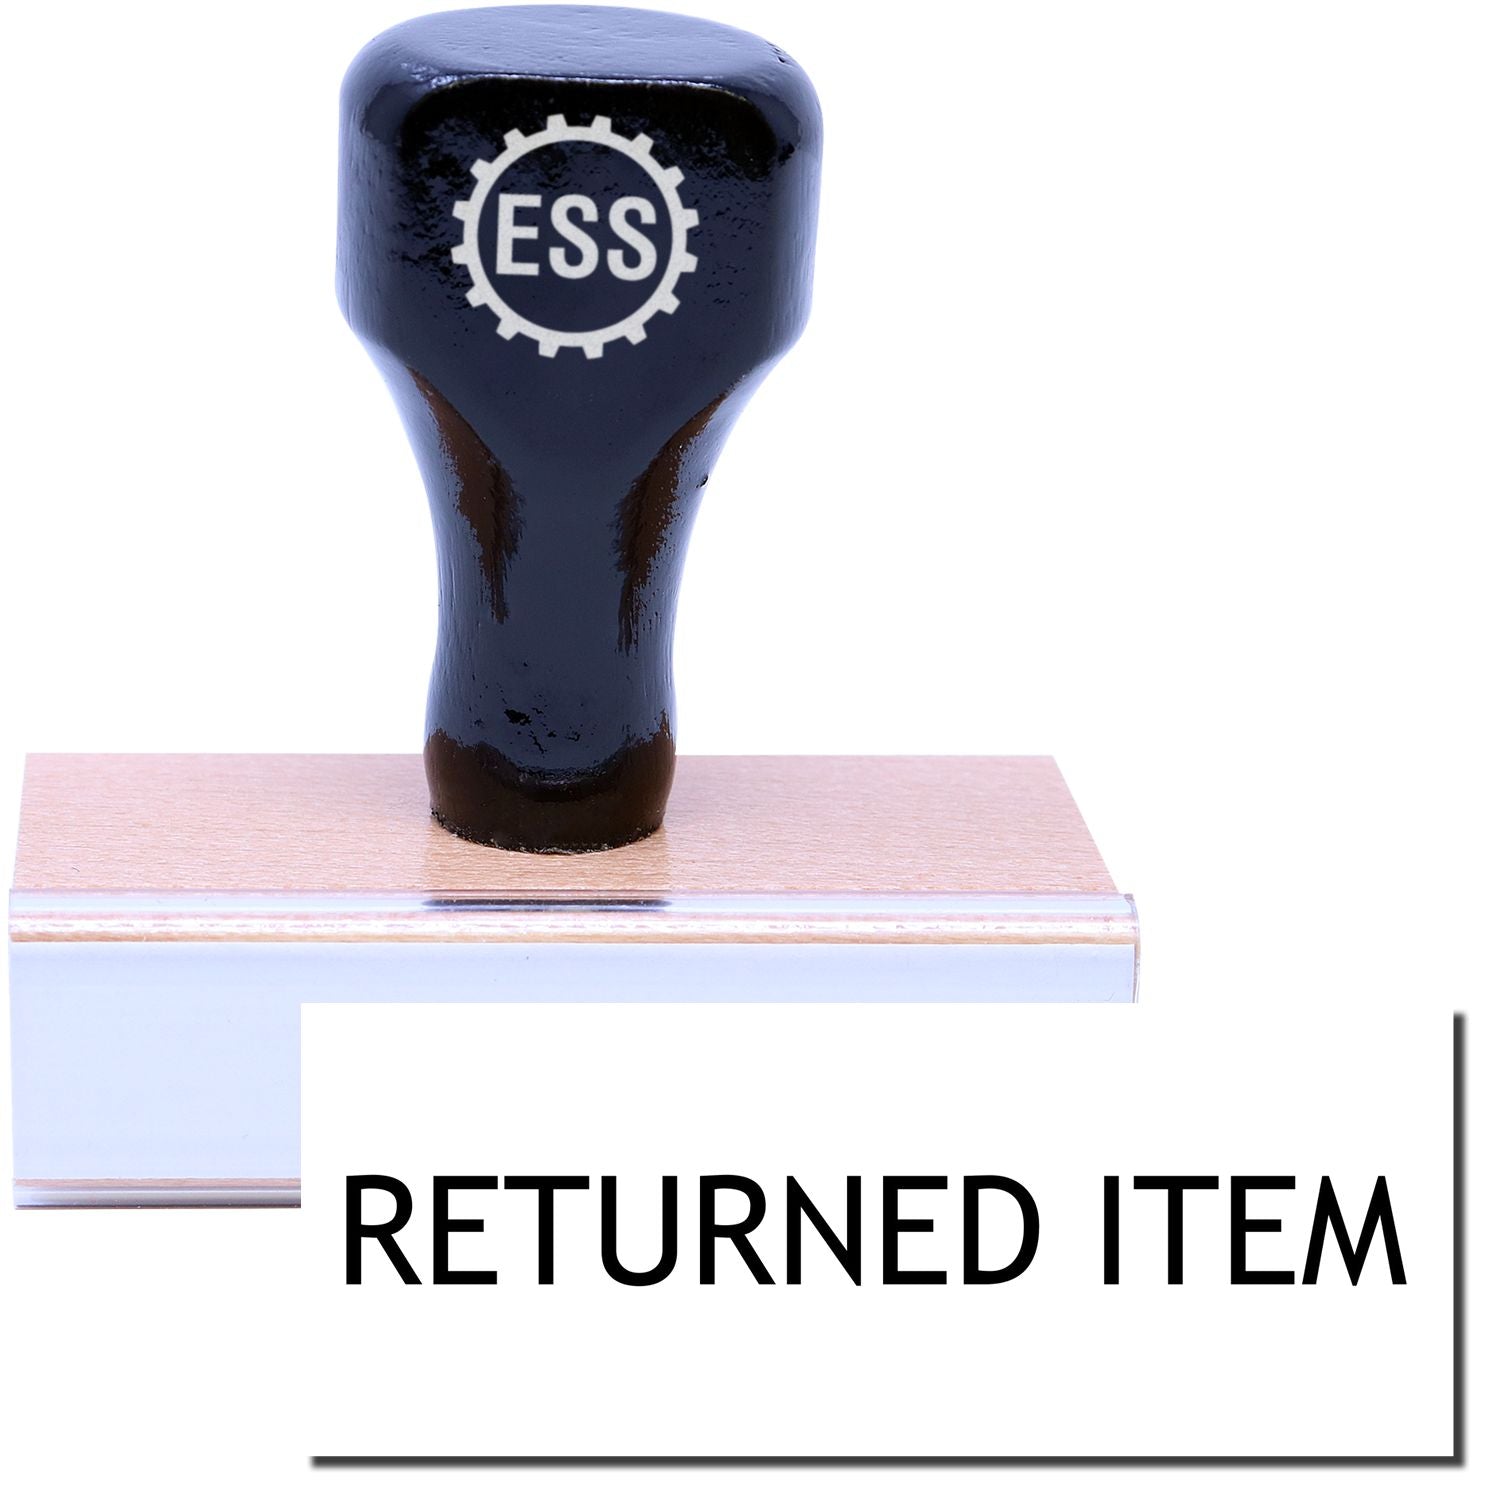 A stock office rubber stamp with a stamped image showing how the text "RETURNED ITEM" is displayed after stamping.